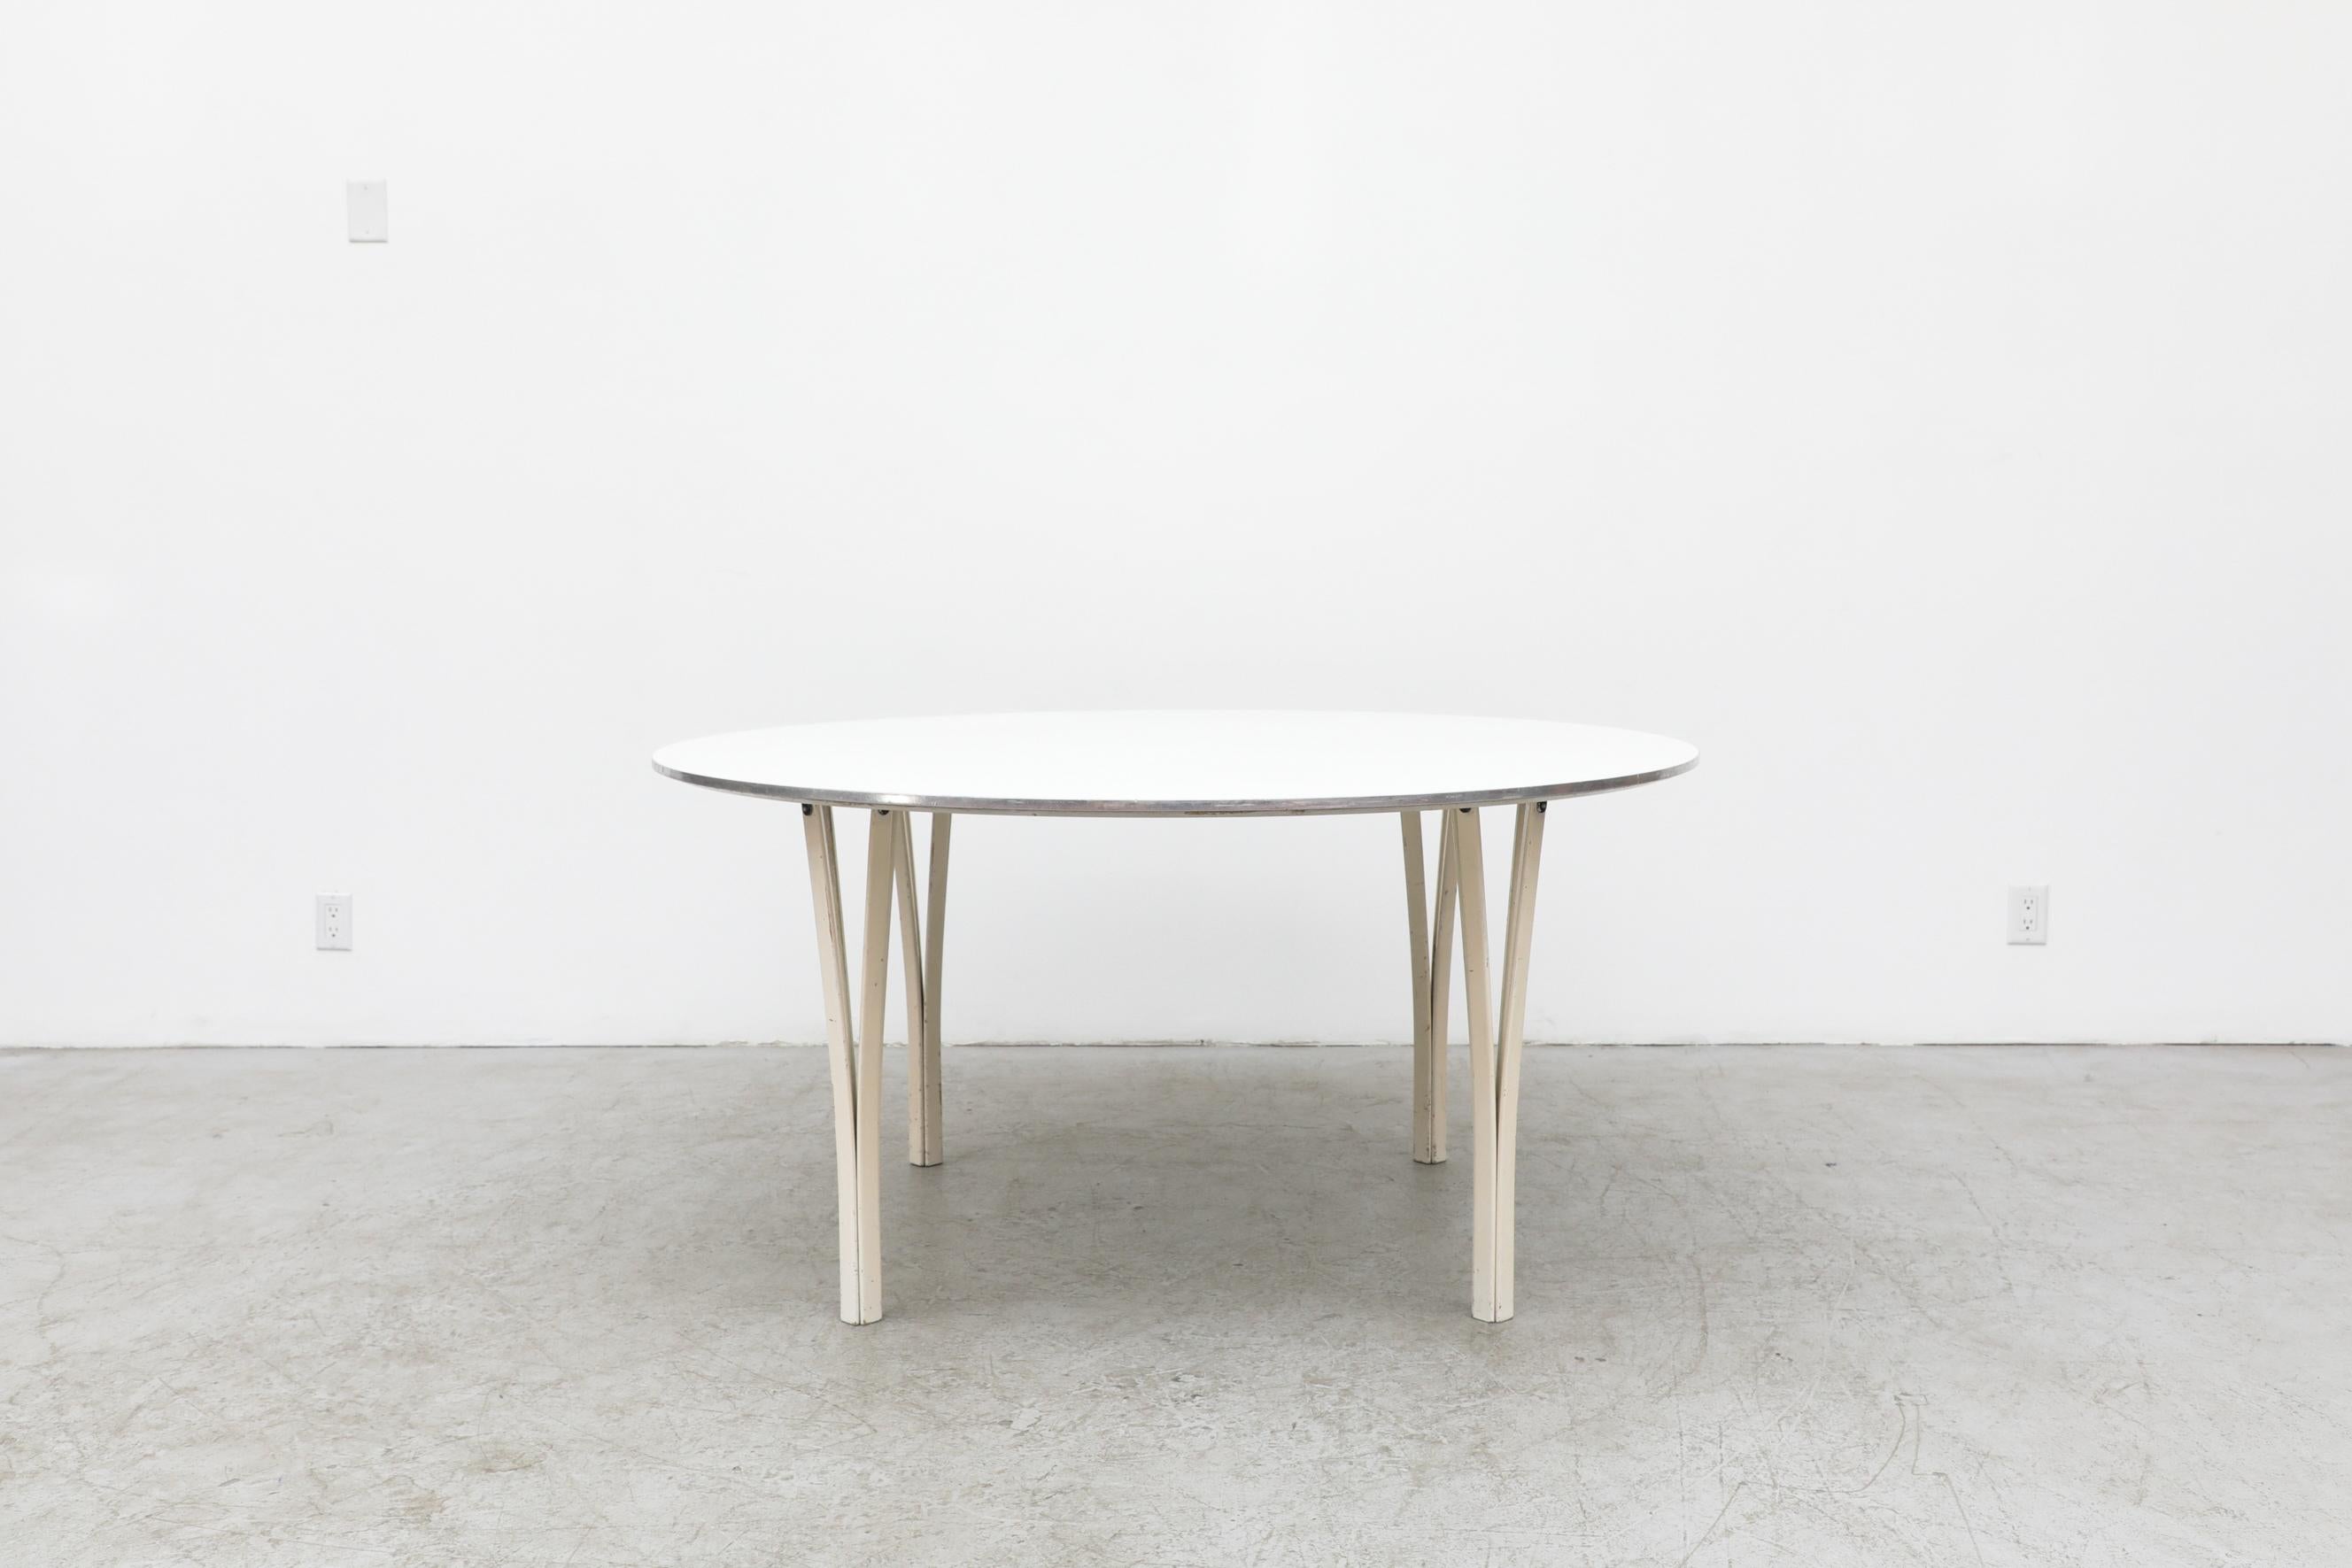 Super Ellipse round dining or center table by Piet Hein & Bruno Mathsson for Fritz Hansen. In original condition with visible scuffing to the lacquer on the legs as well as visible wear to the metal edge banding. Wear is consistent with its age and